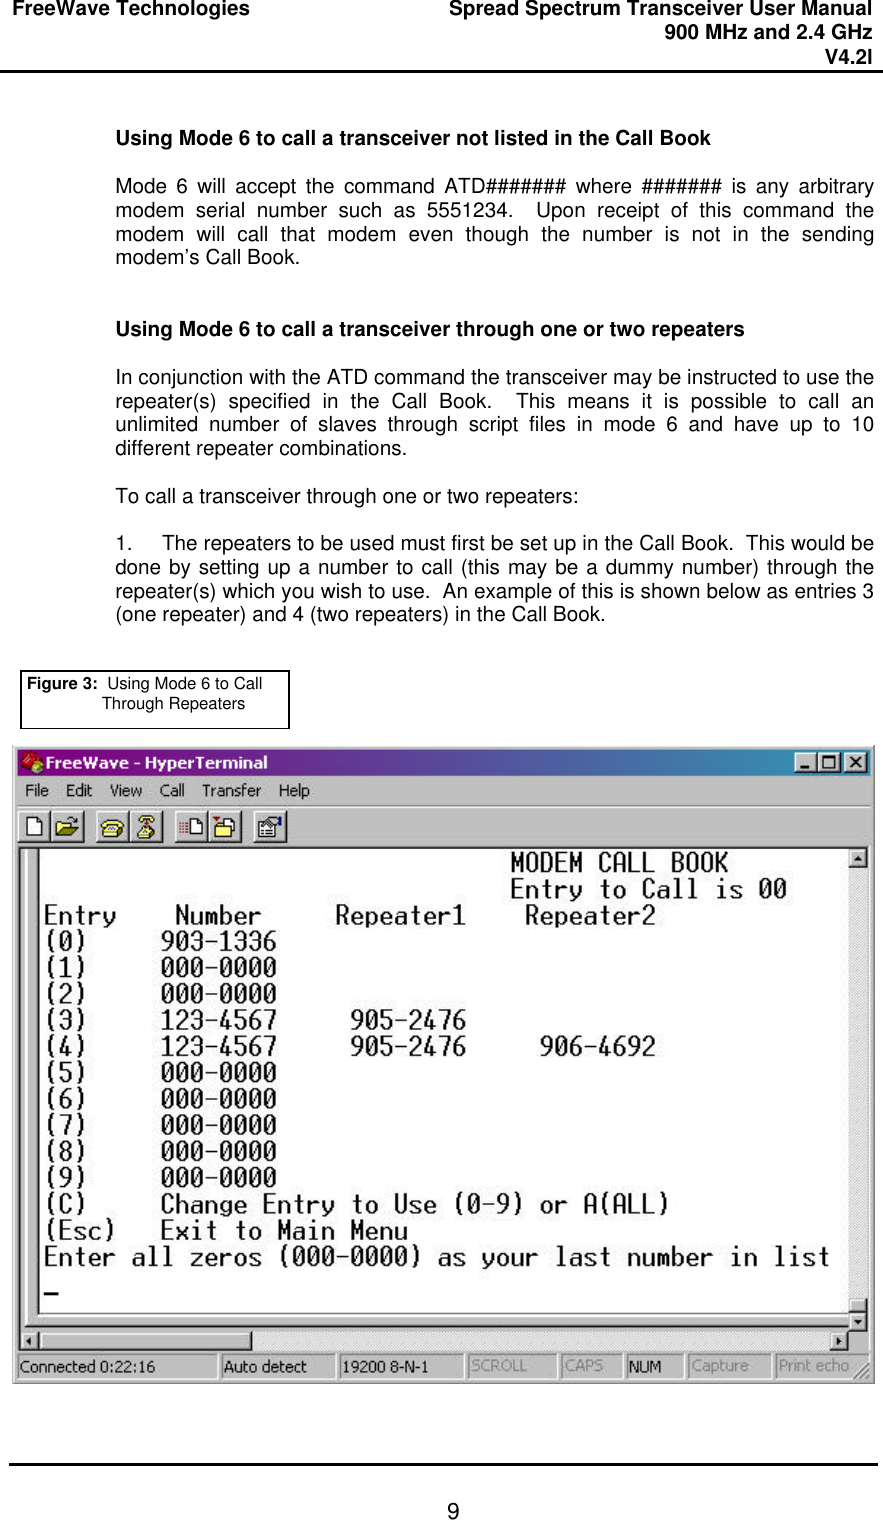 FreeWave Technologies Spread Spectrum Transceiver User Manual 900 MHz and 2.4 GHz V4.2l   9 Using Mode 6 to call a transceiver not listed in the Call Book  Mode 6 will accept the command ATD####### where ####### is any arbitrary modem serial number such as 5551234.  Upon receipt of this command the modem will call that modem even though the number is not in the sending modem’s Call Book.     Using Mode 6 to call a transceiver through one or two repeaters  In conjunction with the ATD command the transceiver may be instructed to use the repeater(s) specified in the Call Book.  This means it is possible to call an unlimited number of slaves through script files in mode 6 and have up to 10 different repeater combinations.    To call a transceiver through one or two repeaters:  1. The repeaters to be used must first be set up in the Call Book.  This would be done by setting up a number to call (this may be a dummy number) through the repeater(s) which you wish to use.  An example of this is shown below as entries 3 (one repeater) and 4 (two repeaters) in the Call Book.        Figure 3:  Using Mode 6 to Call Through Repeaters 